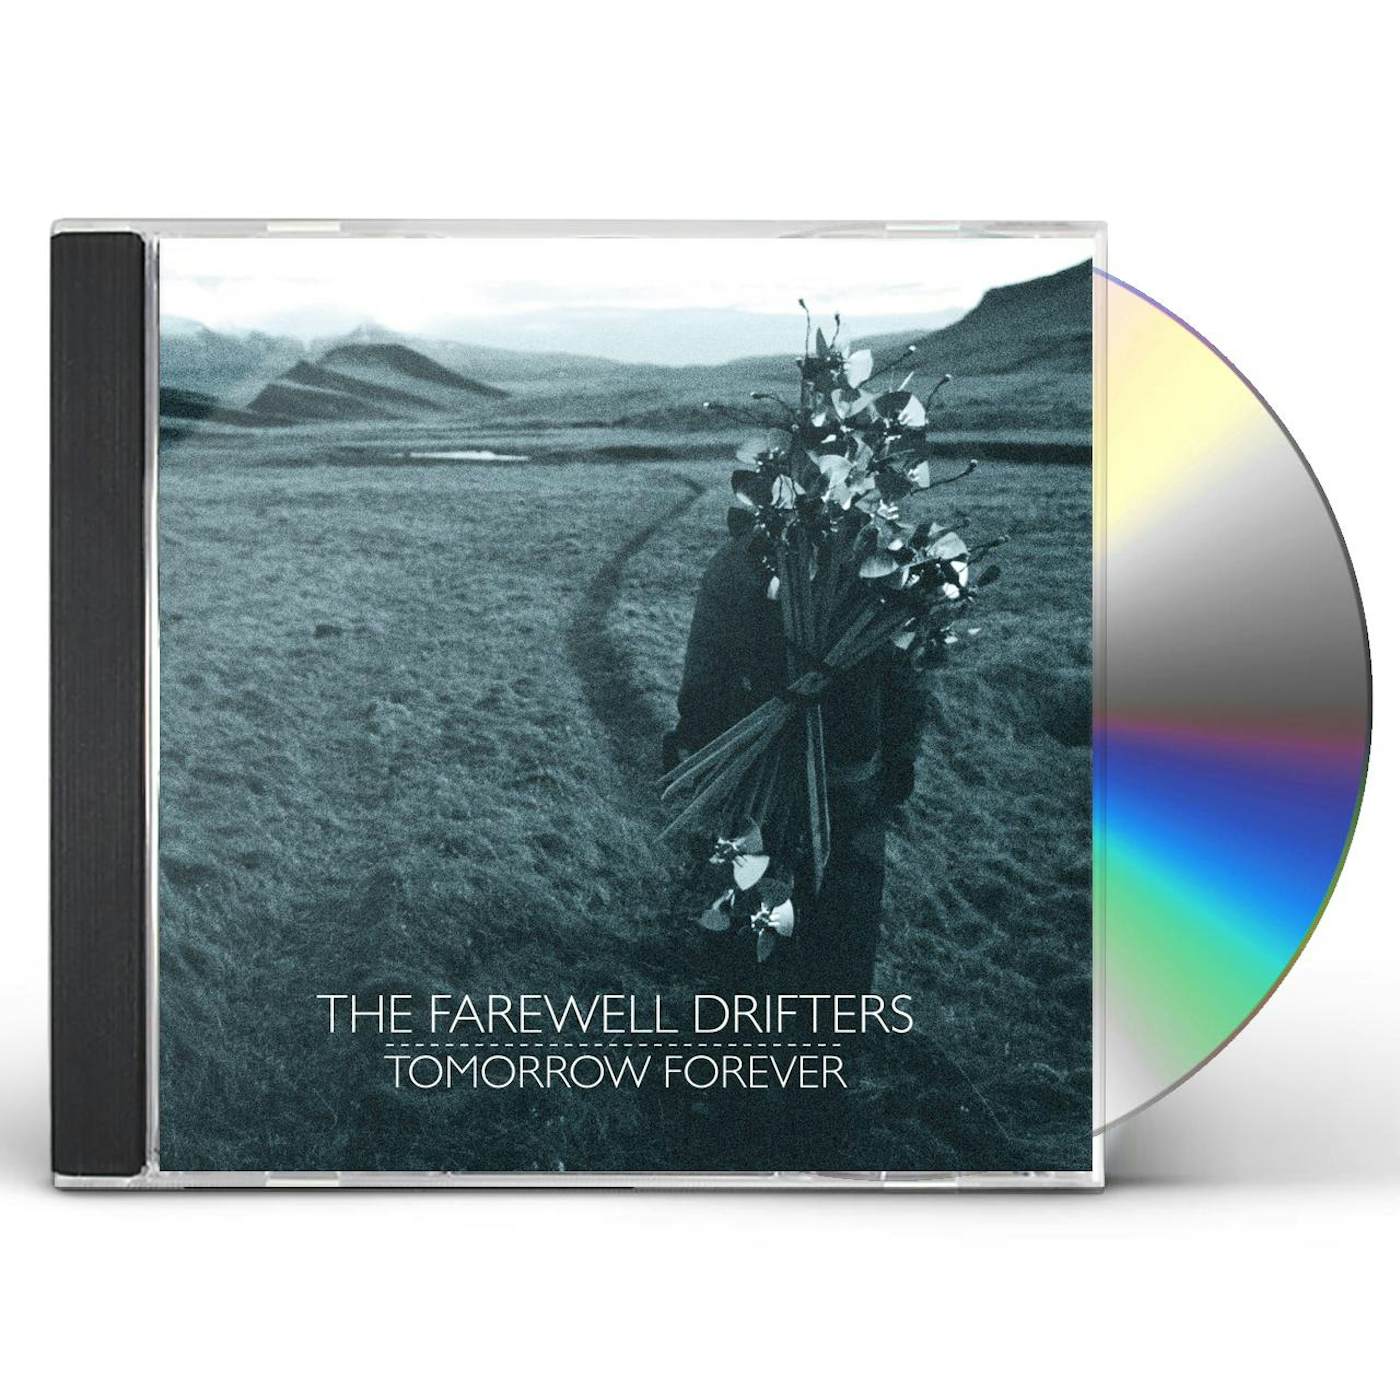 The Farewell Drifters TOMORROW FOREVER CD